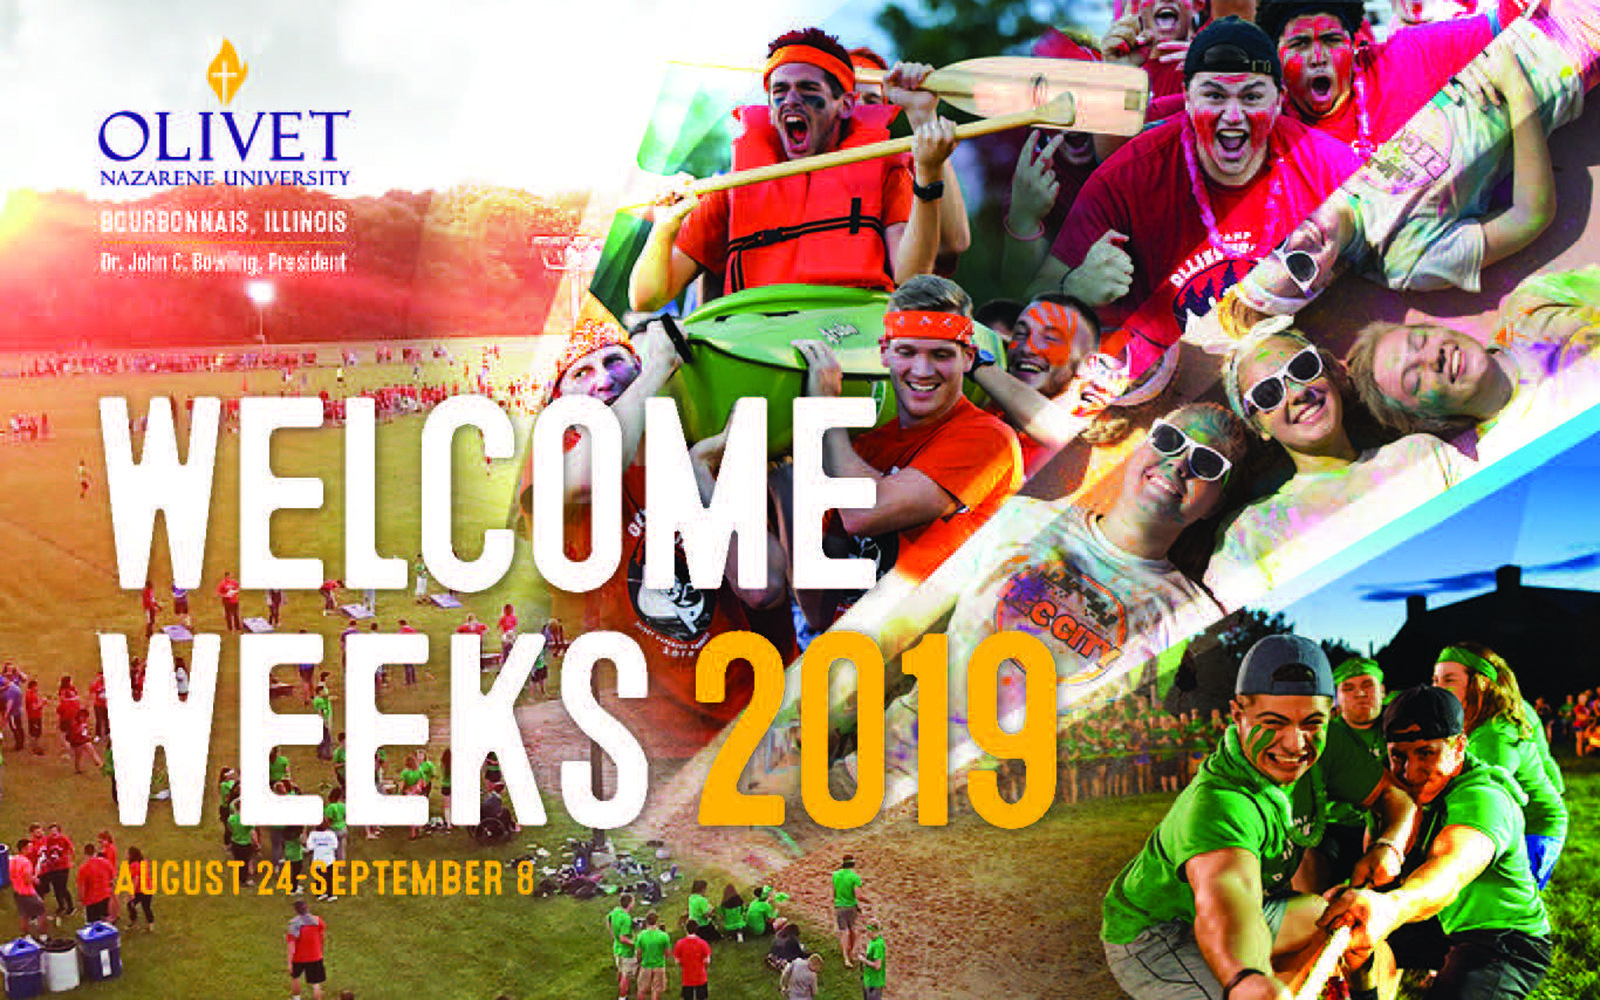 Olivet_student_welcome_life_activities_fall_2019_web.jpg